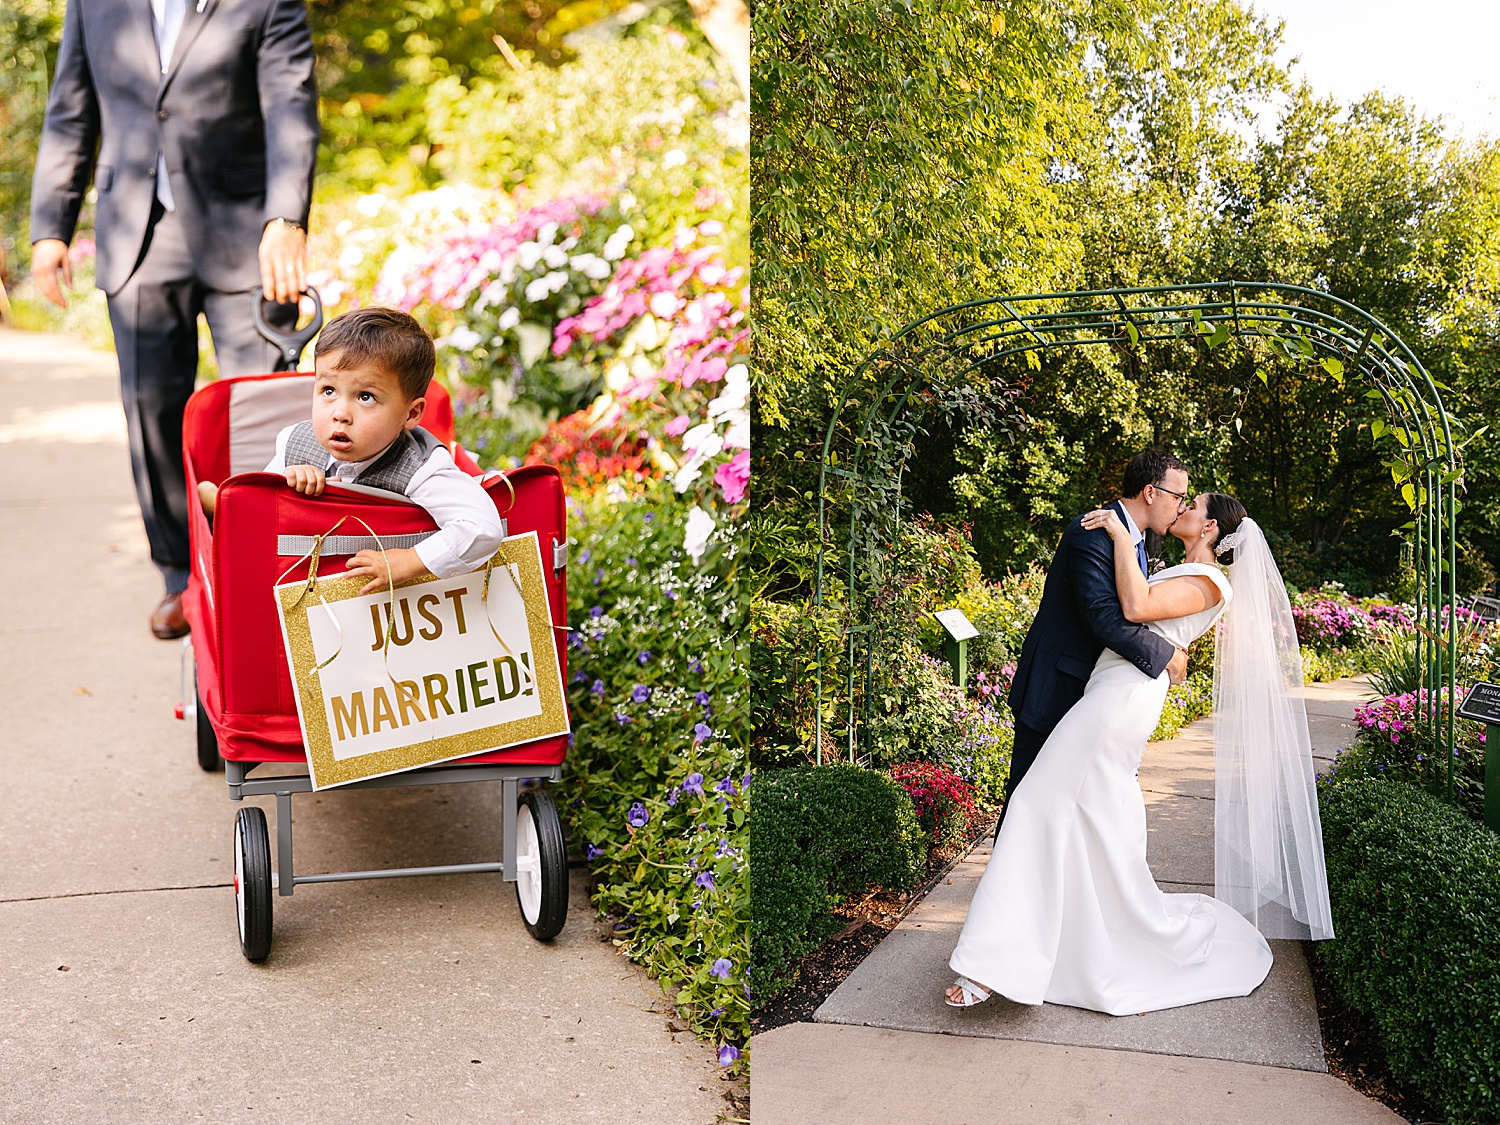 Bride and groom have just married ring bearer in wagon at wedding ceremony